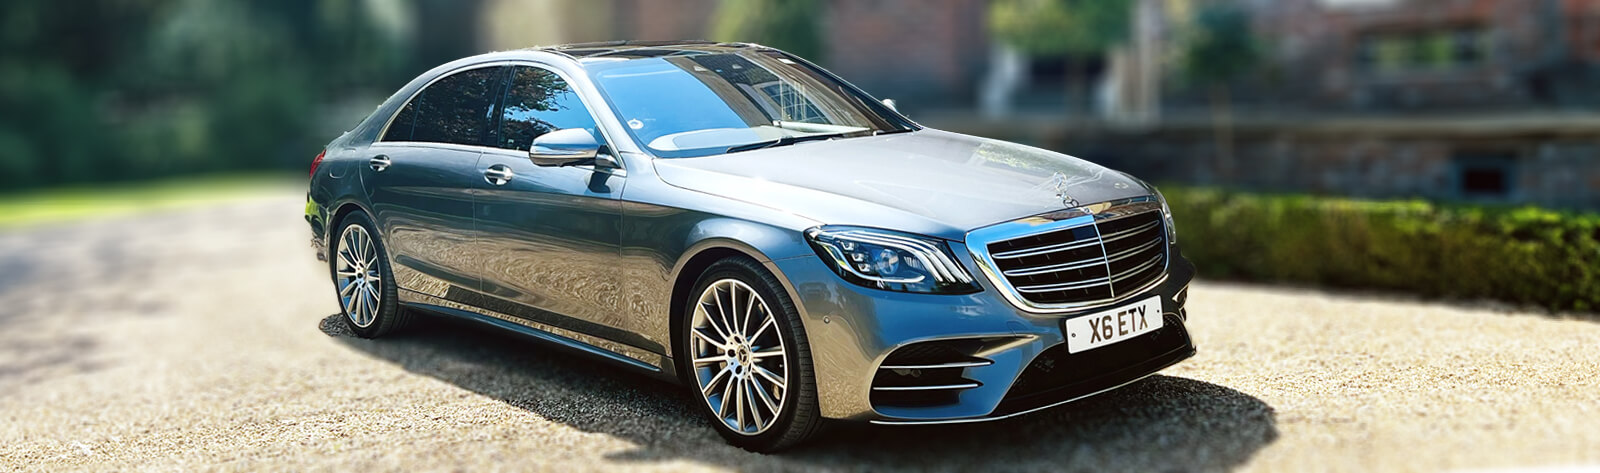 mercedes v class and mercedes s class Holmfirth